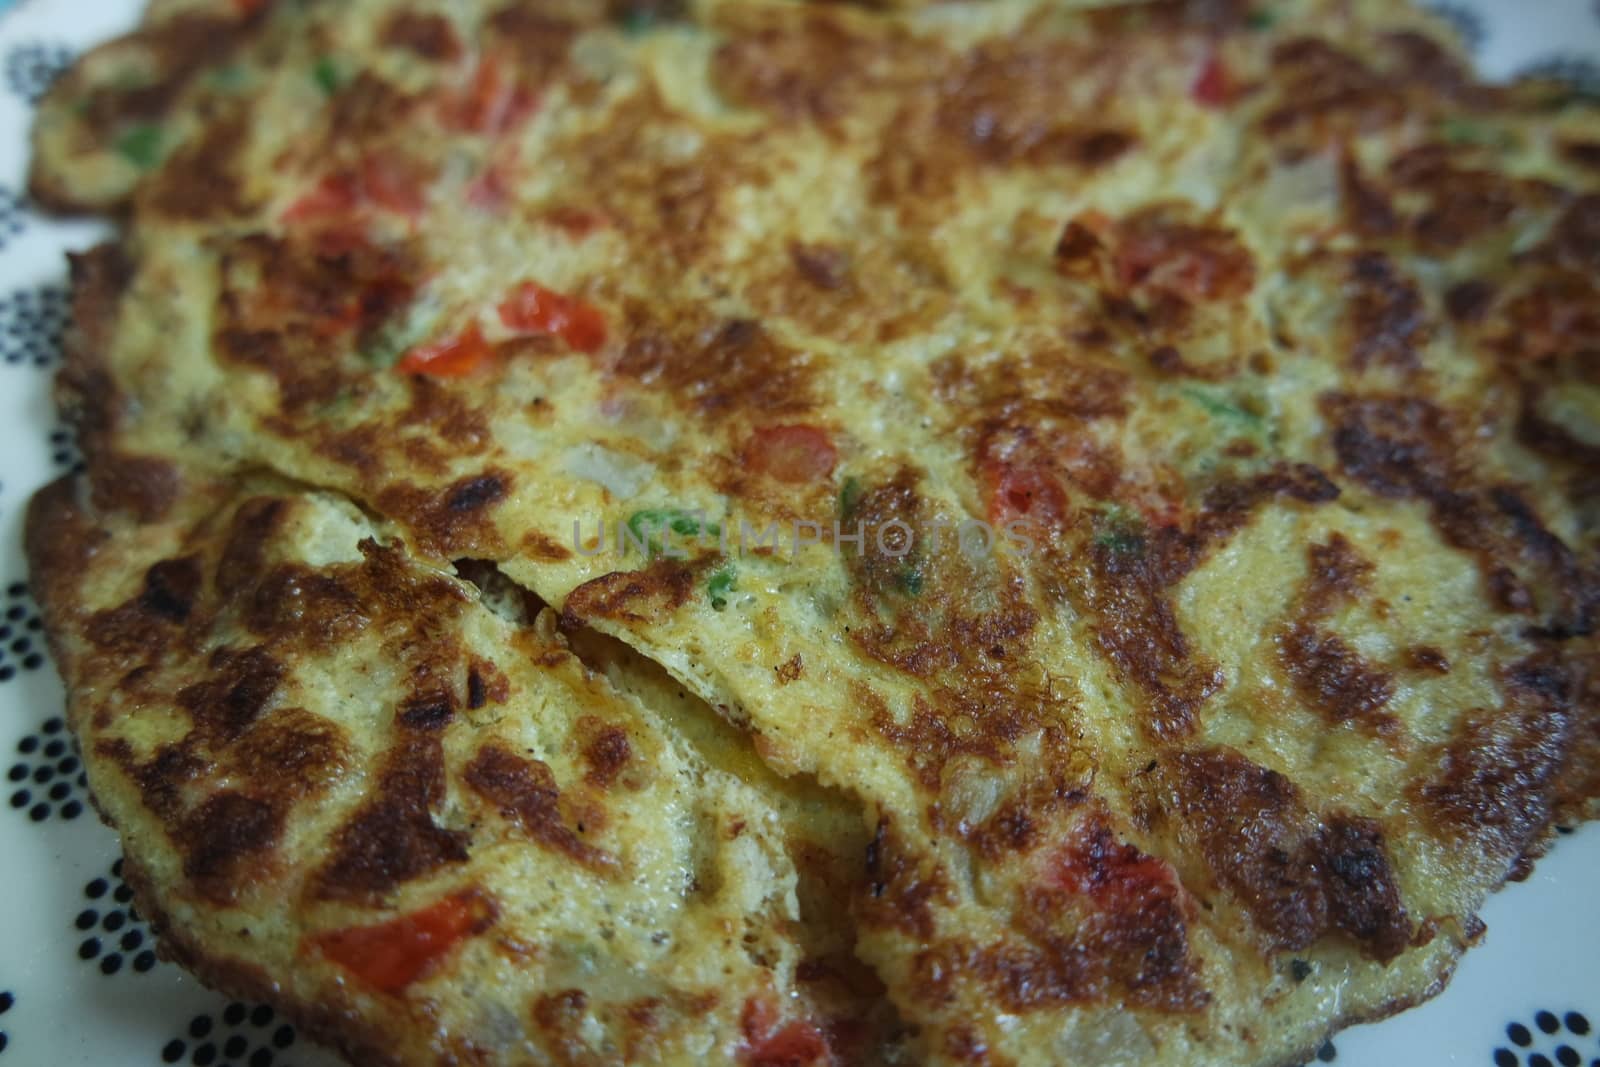 Close-up view with selective focus of egg omelet with peppers and spices sprinkled